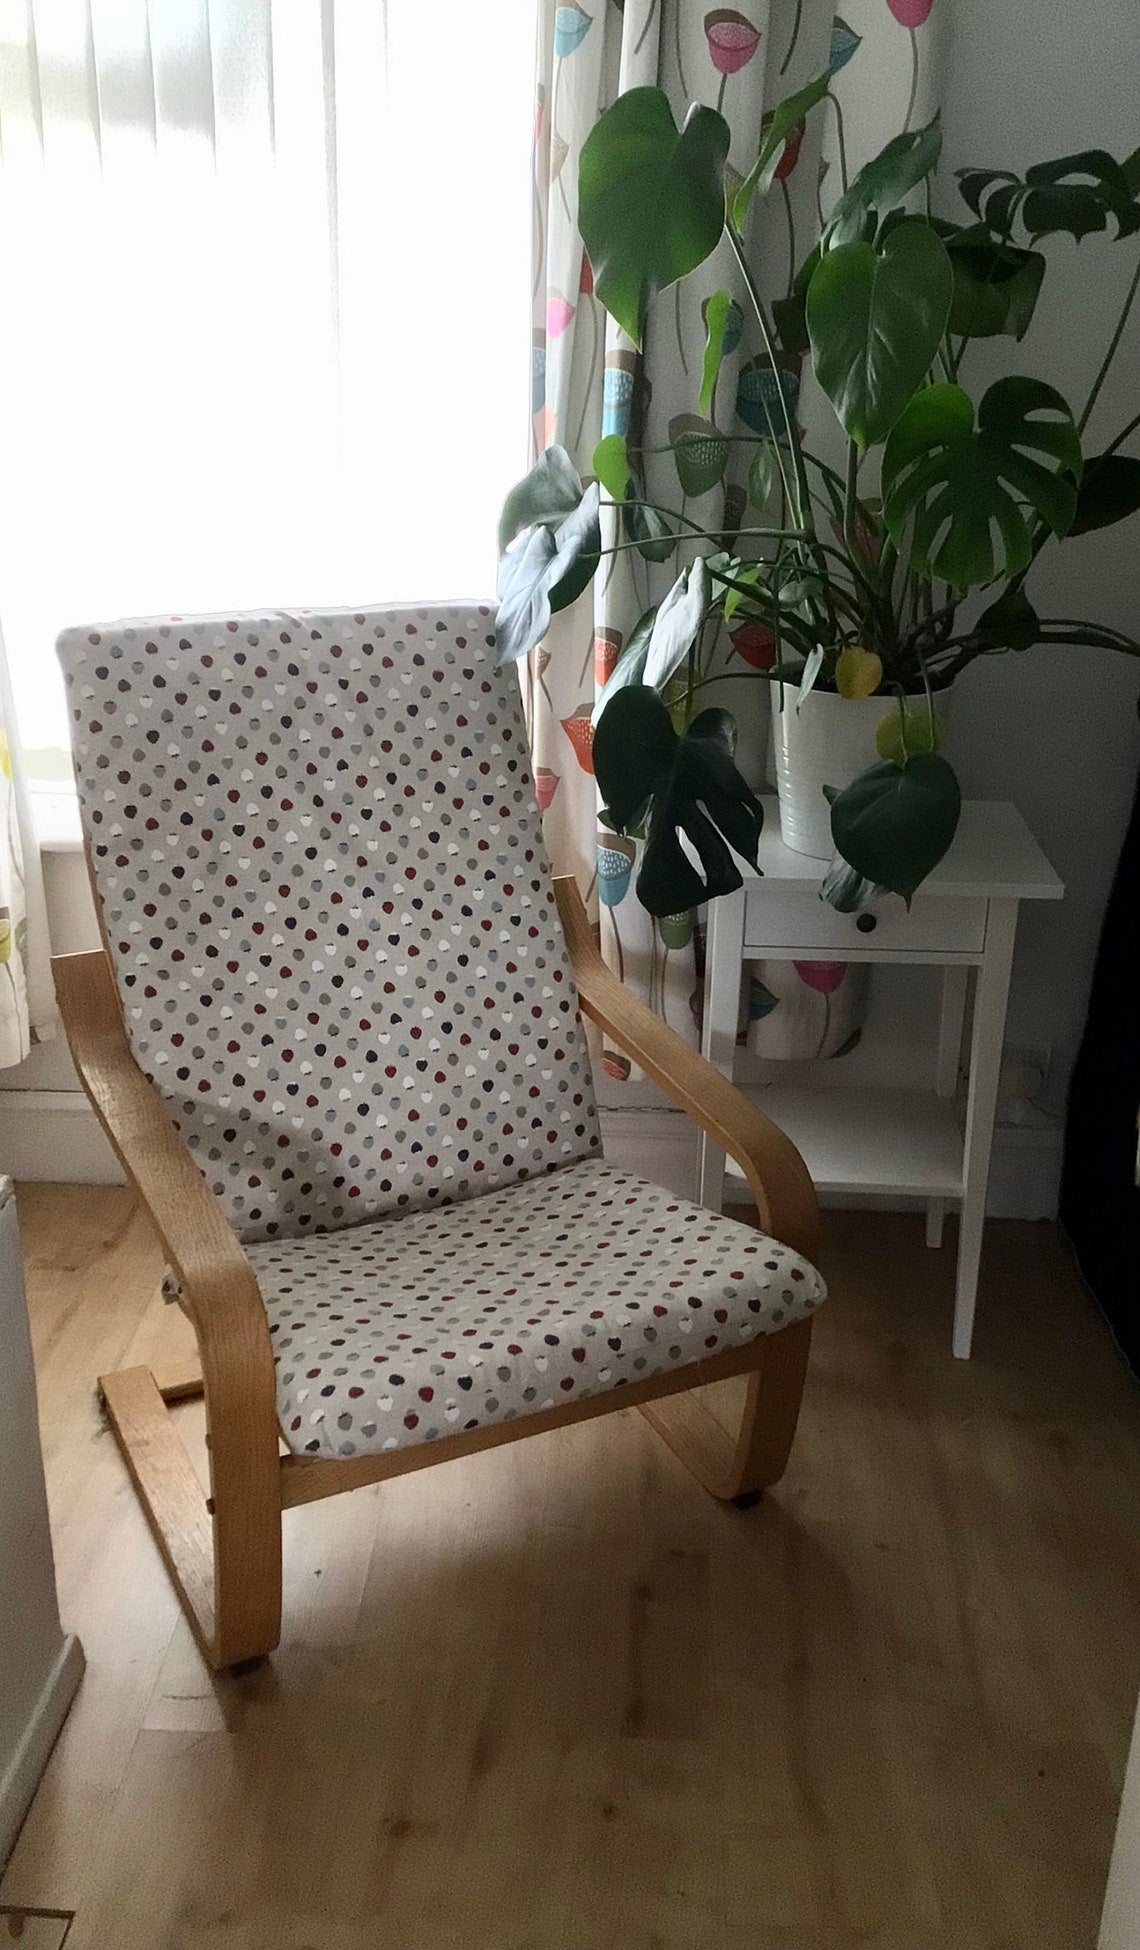 SALE, LAST ONE. Ikea Poang replacement chair cover.  Custom made cover